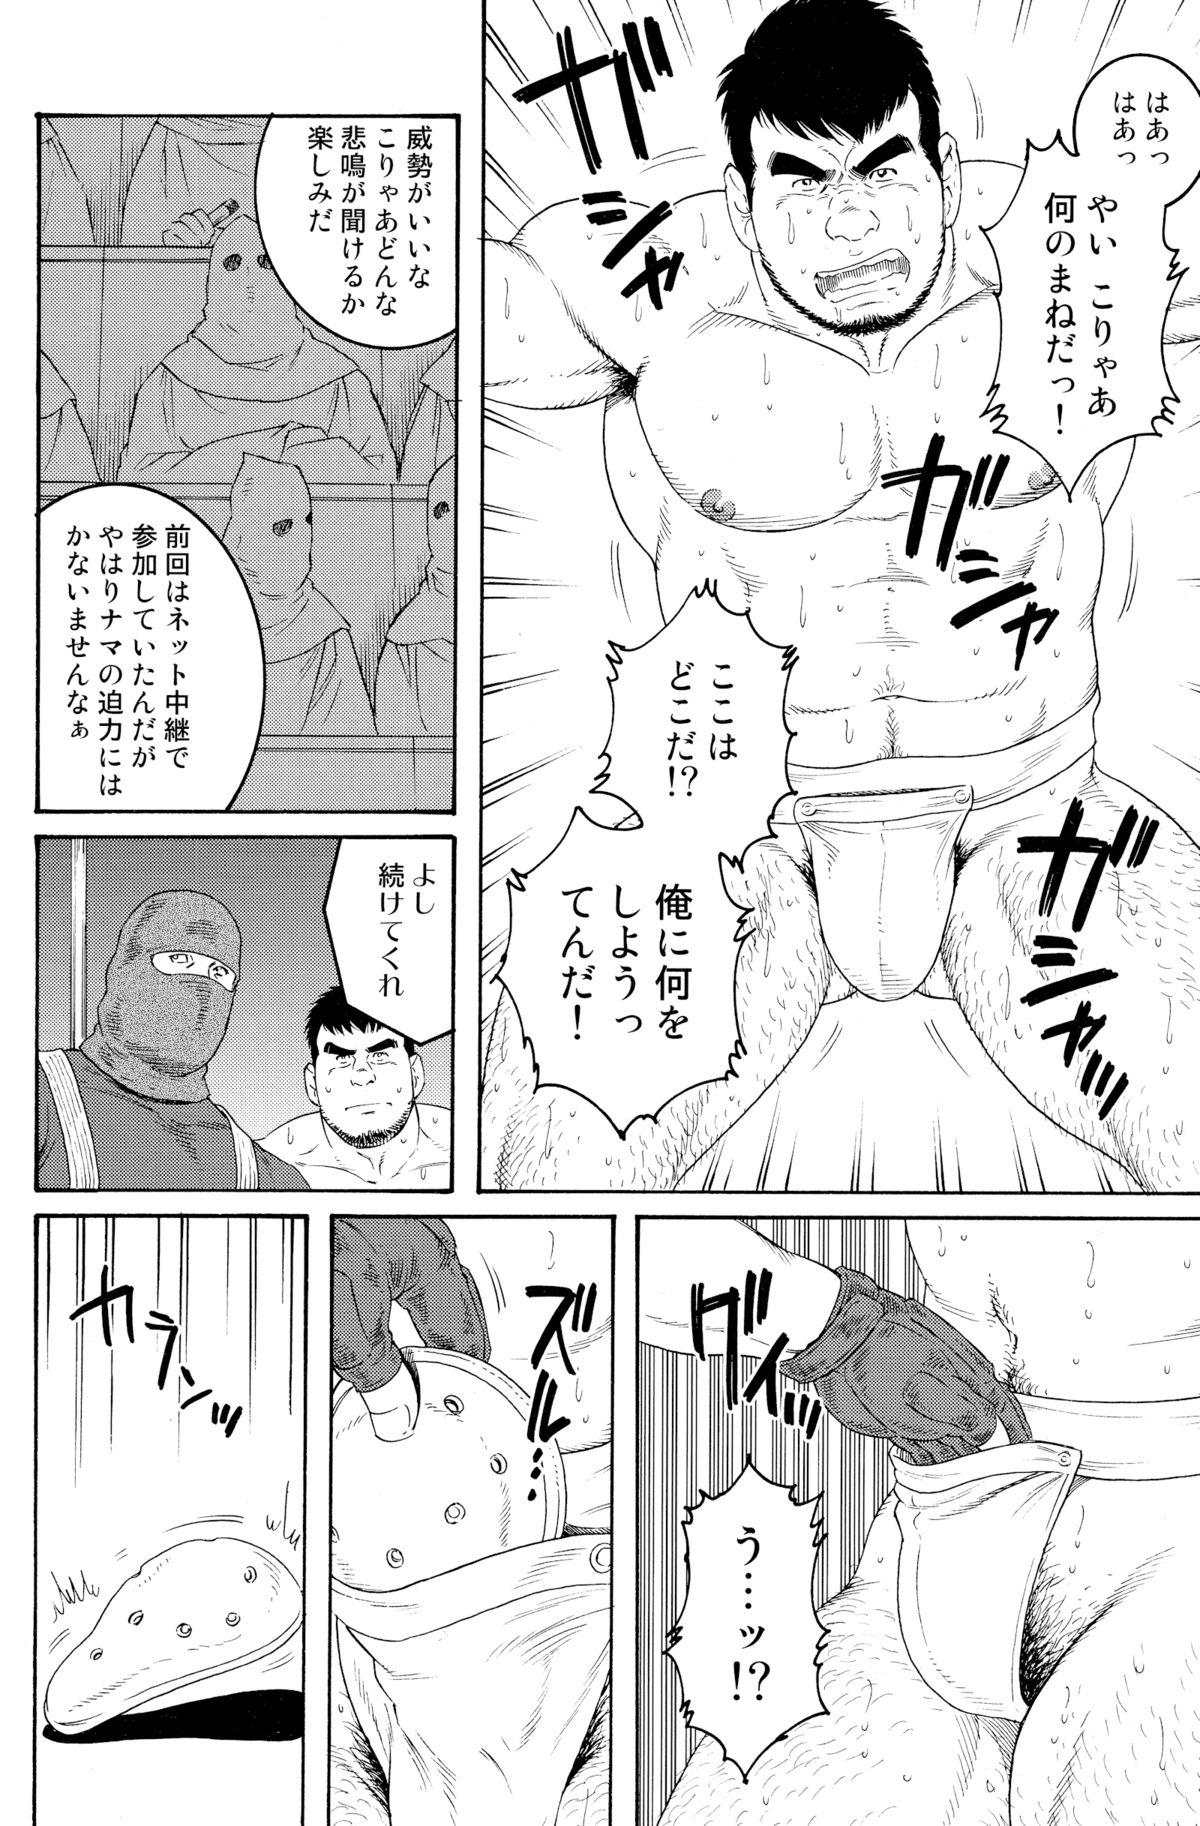 [Gengoroh Tagame] Standing Ovation page 4 full